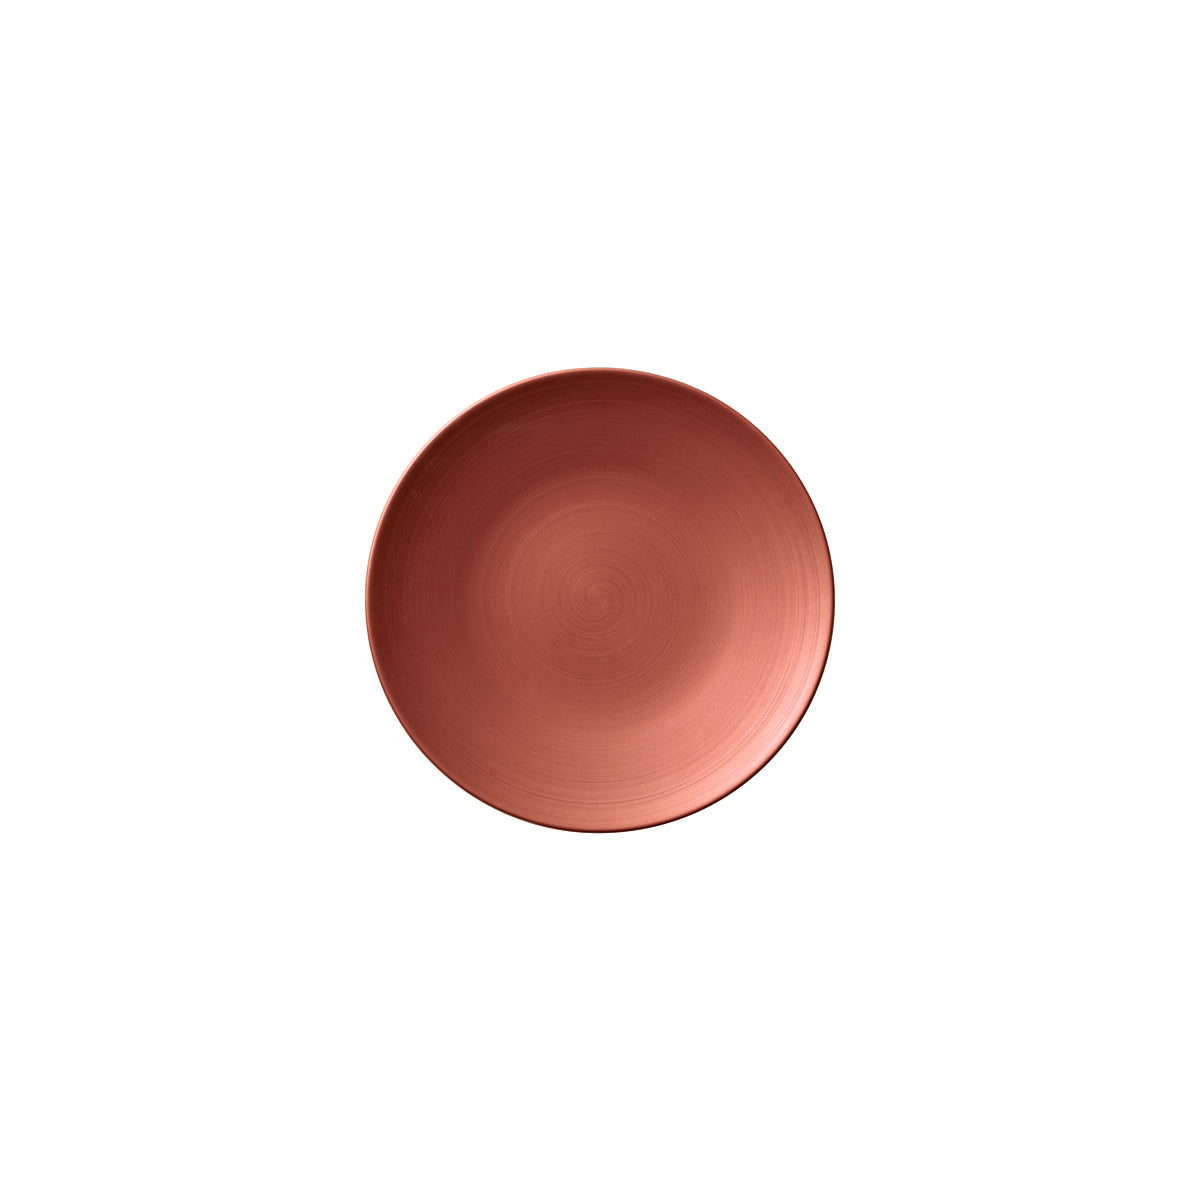 VB16-4070-2630 Villeroy And Boch Villeroy And Boch Copper Glow Coupe Plate 250mm Tomkin Australia Hospitality Supplies